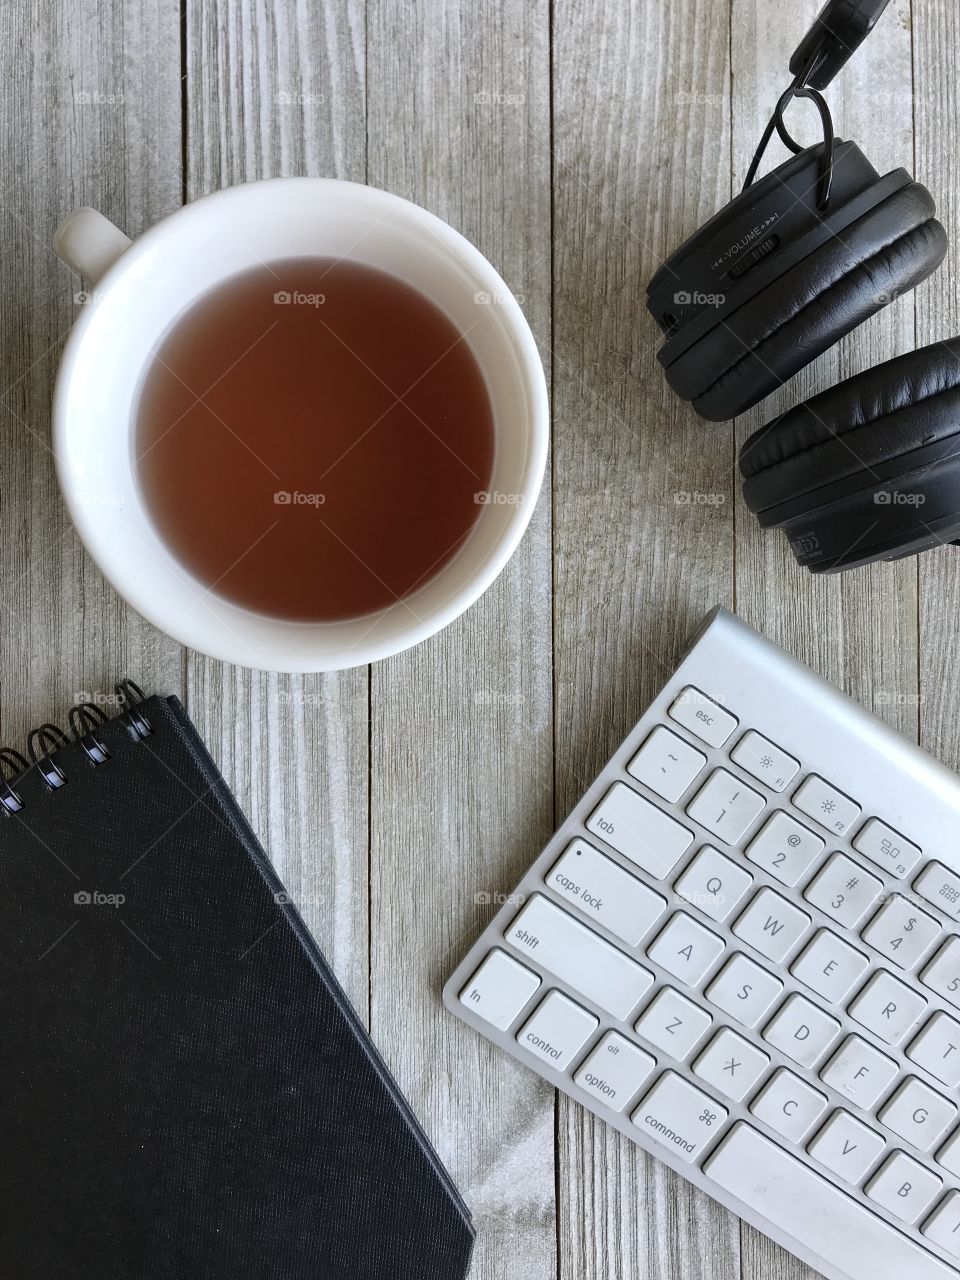 Looking down on a table which has a cup of tea along with a keyboard, notebook and headphones getting ready to start the day!!